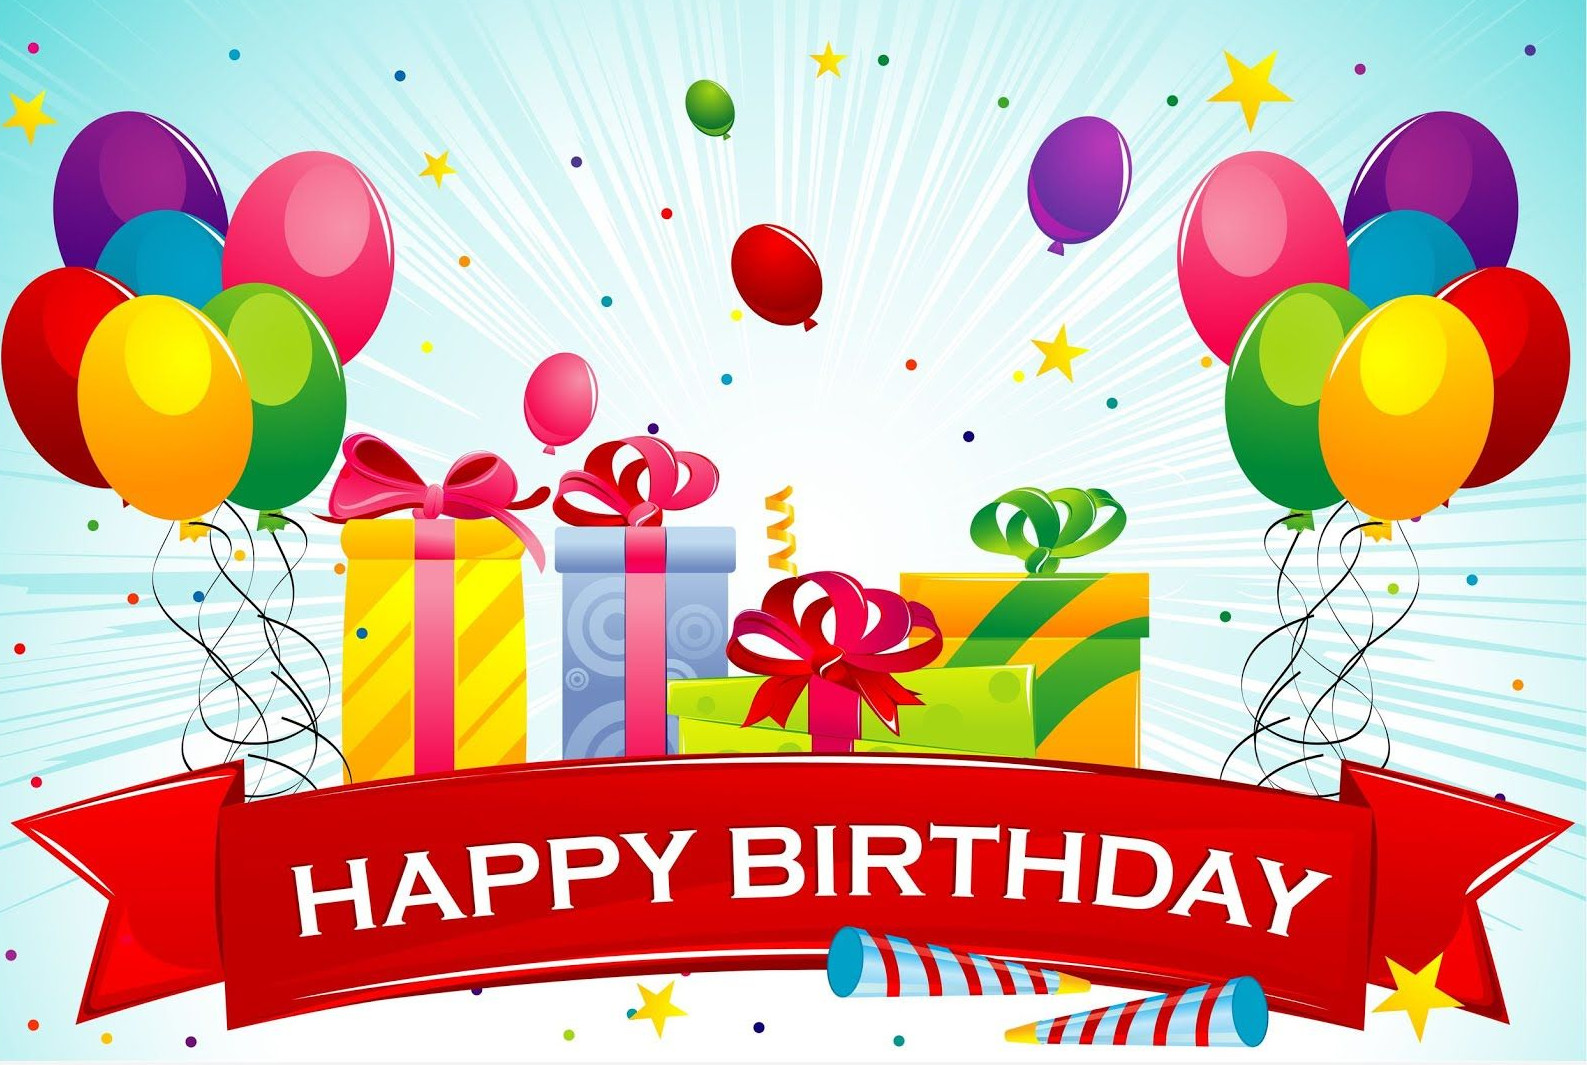 Free E Birthday Cards
 35 Happy Birthday Cards Free To Download – The WoW Style